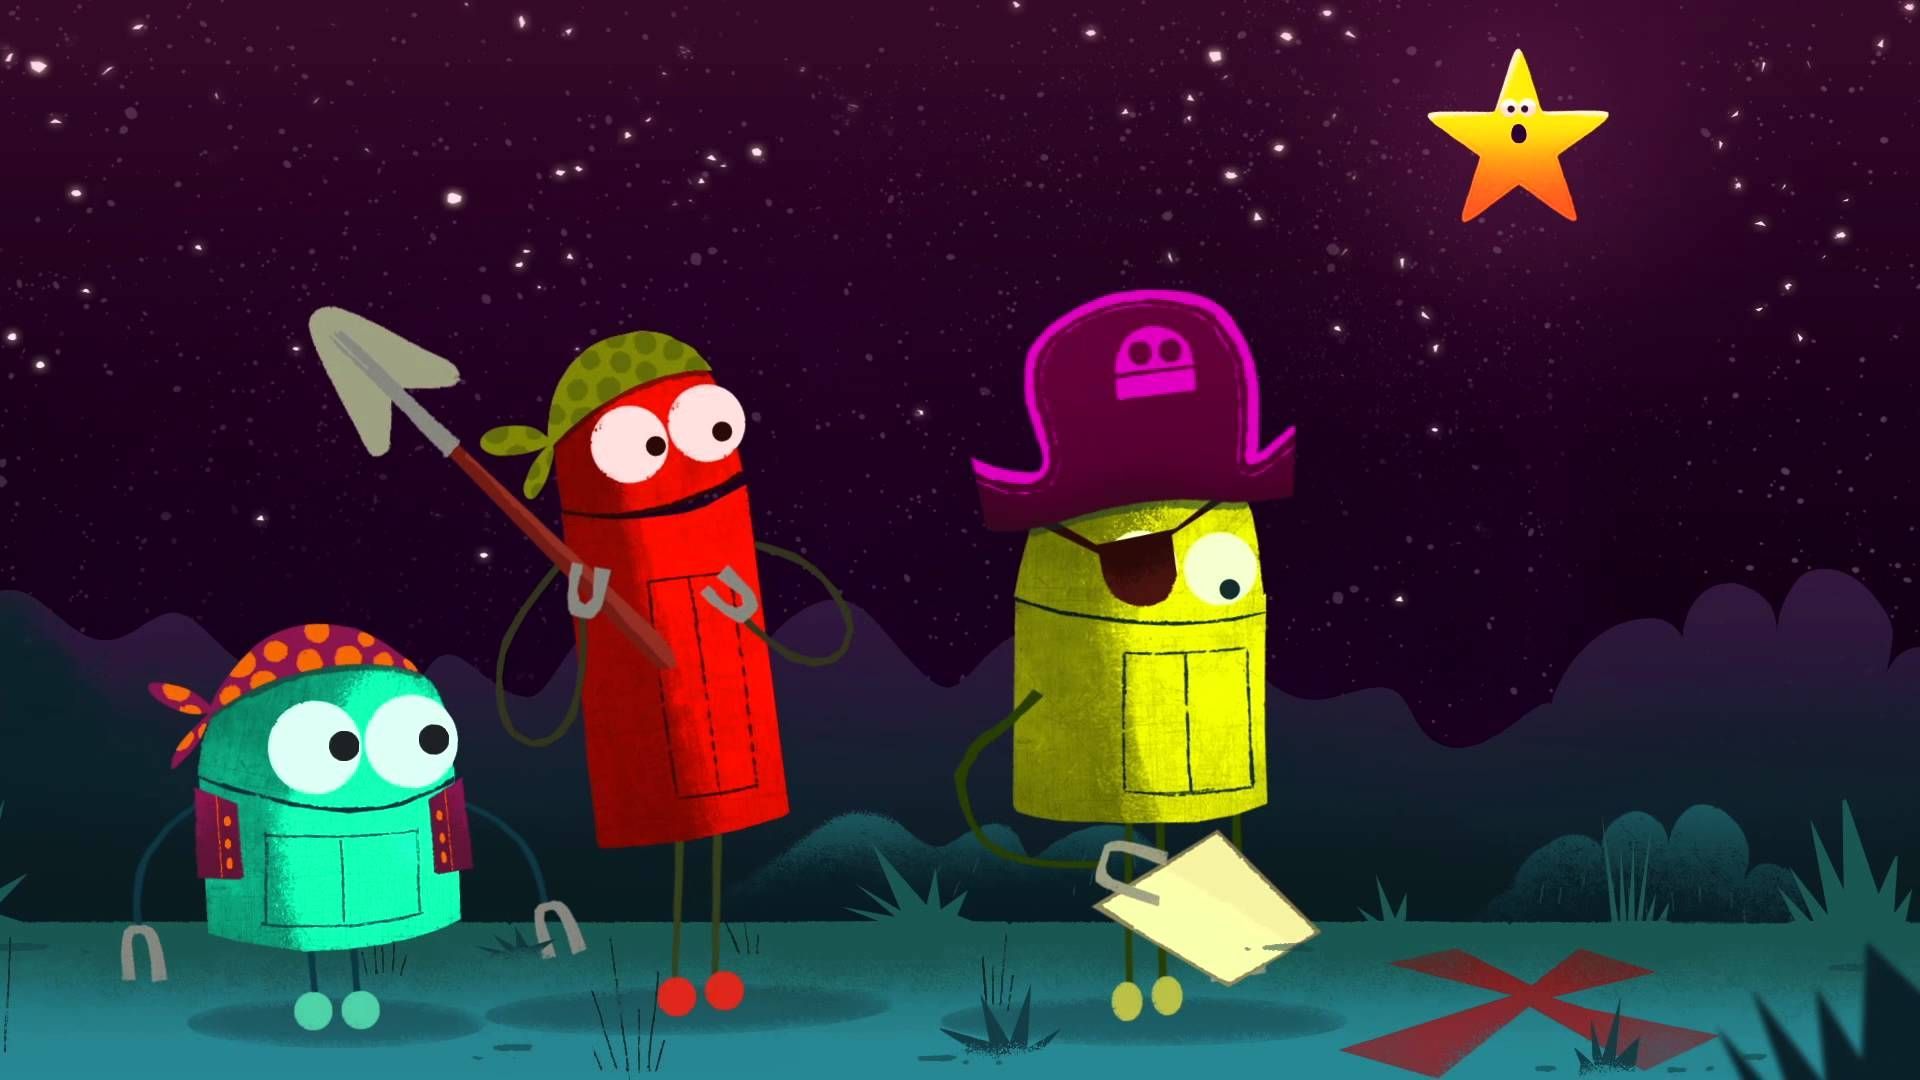 I'm A Star, Outer Space Songs by StoryBots. Astronomia, Animação